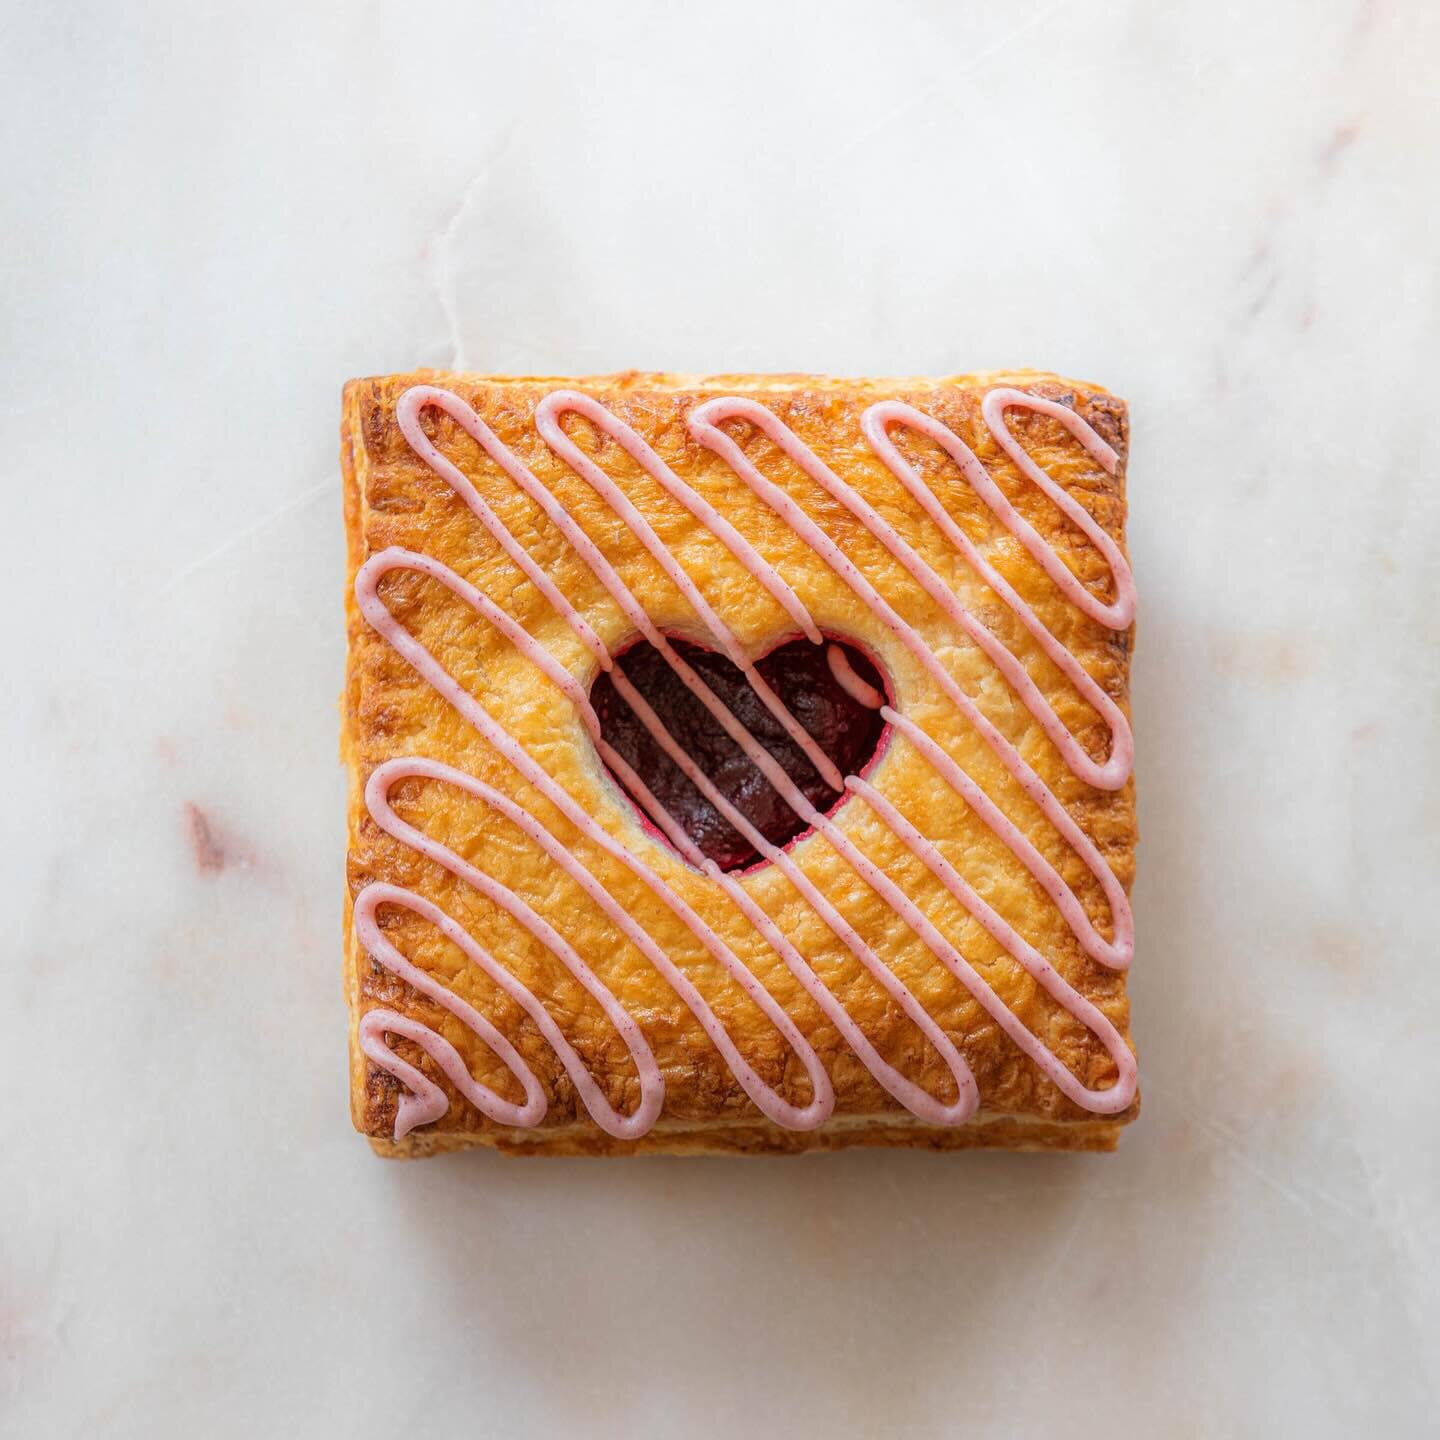 We&rsquo;ll be open tomorrow for Valentines Day with plenty of sweet treats including these Raspberry White Chocolate Hand Pies. Pick one up for your sweetie 💌